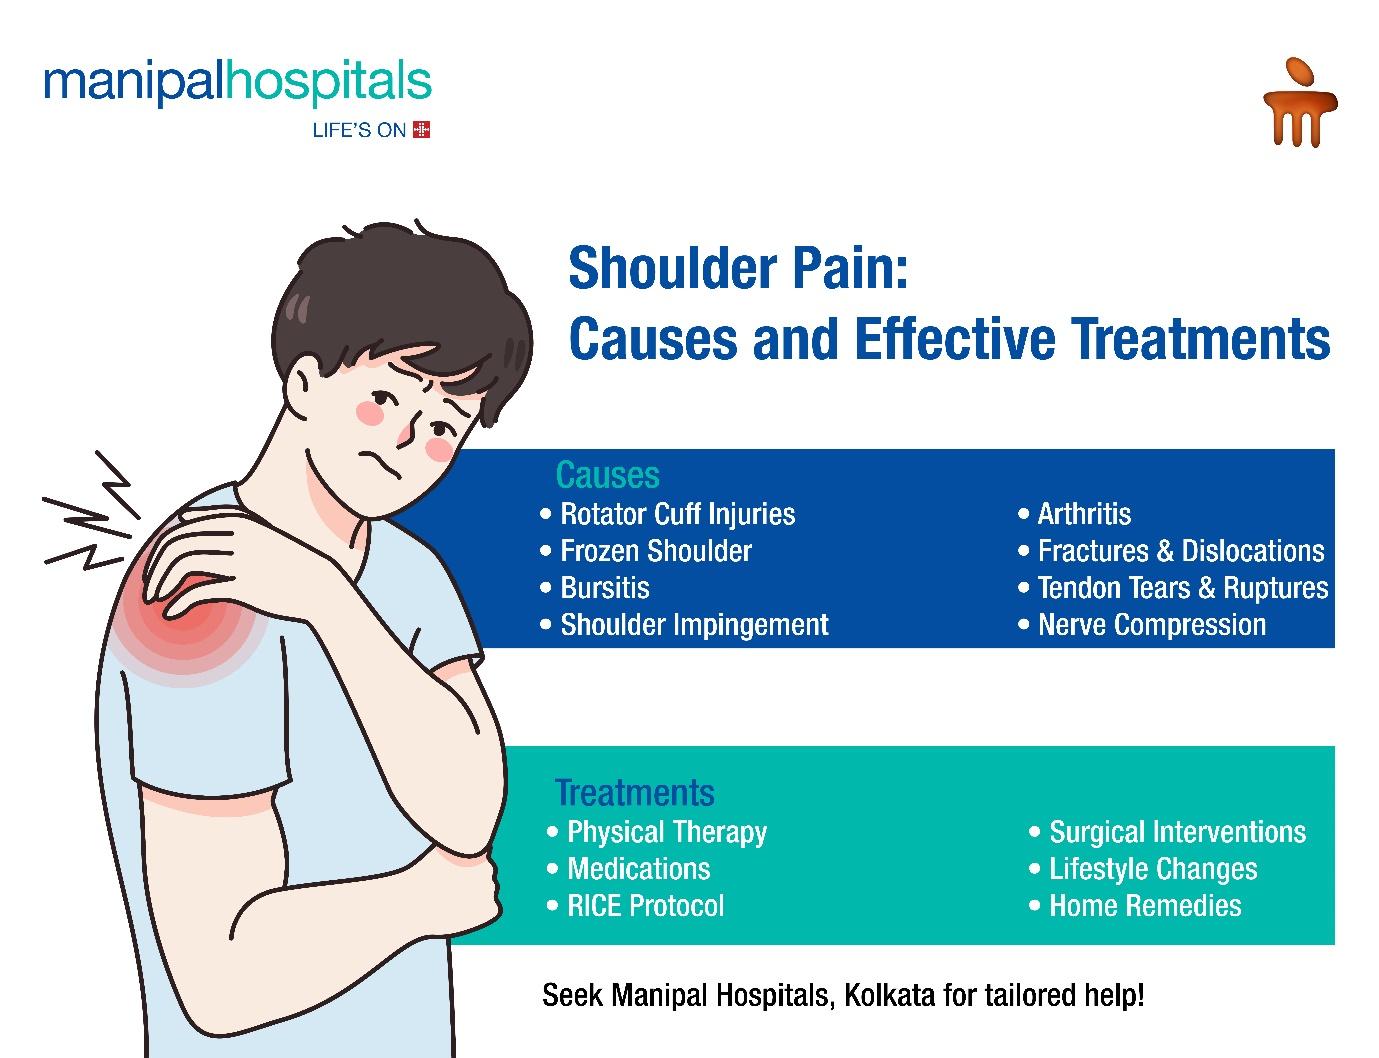 Common Causes and Effective Treatments for Shoulder Pain